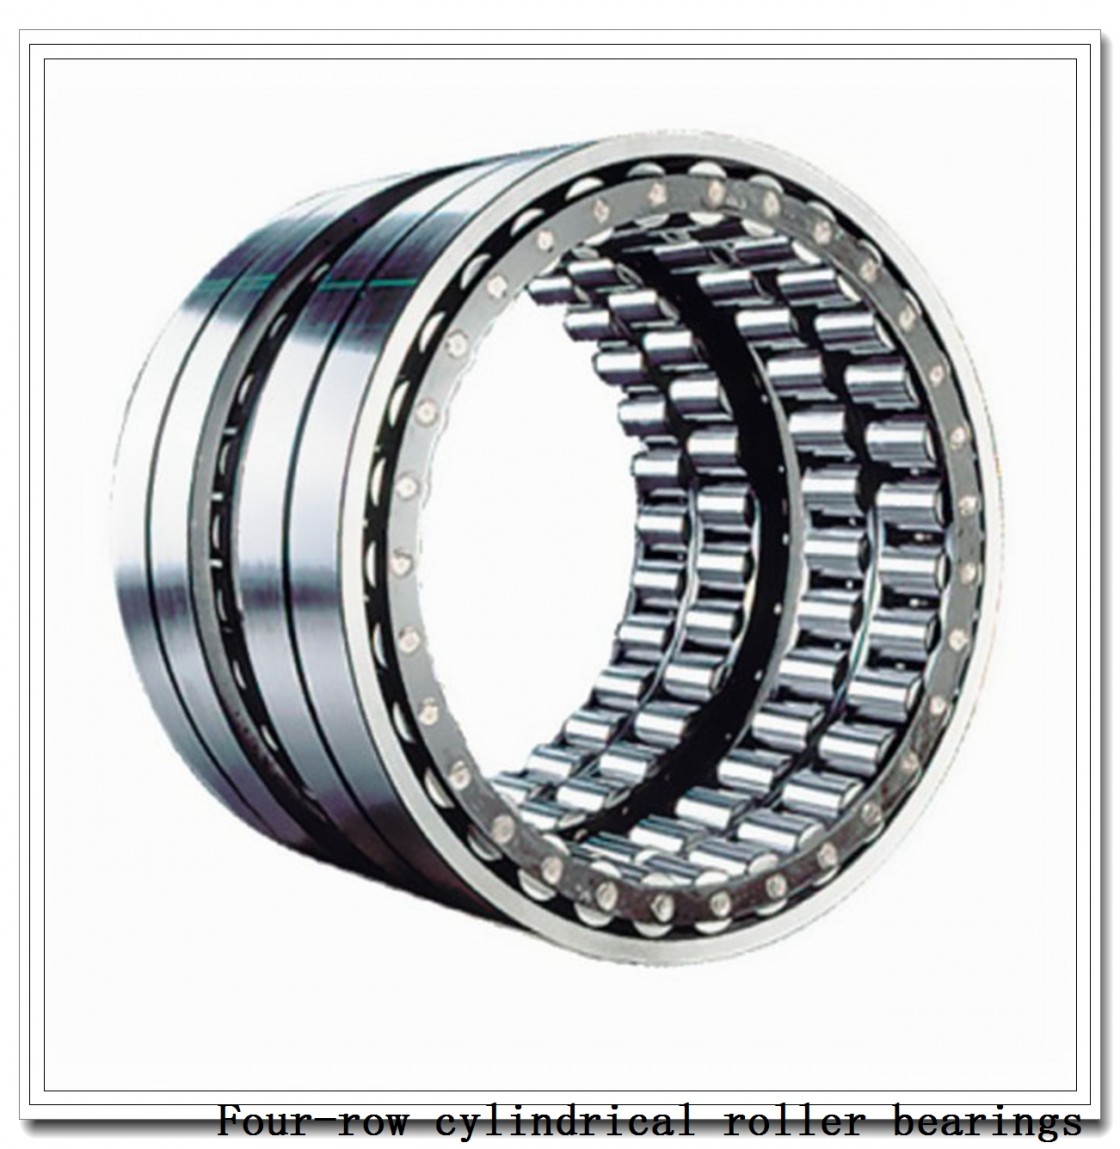 190ARVS1528 212RYS1528 Four-Row Cylindrical Roller Bearings